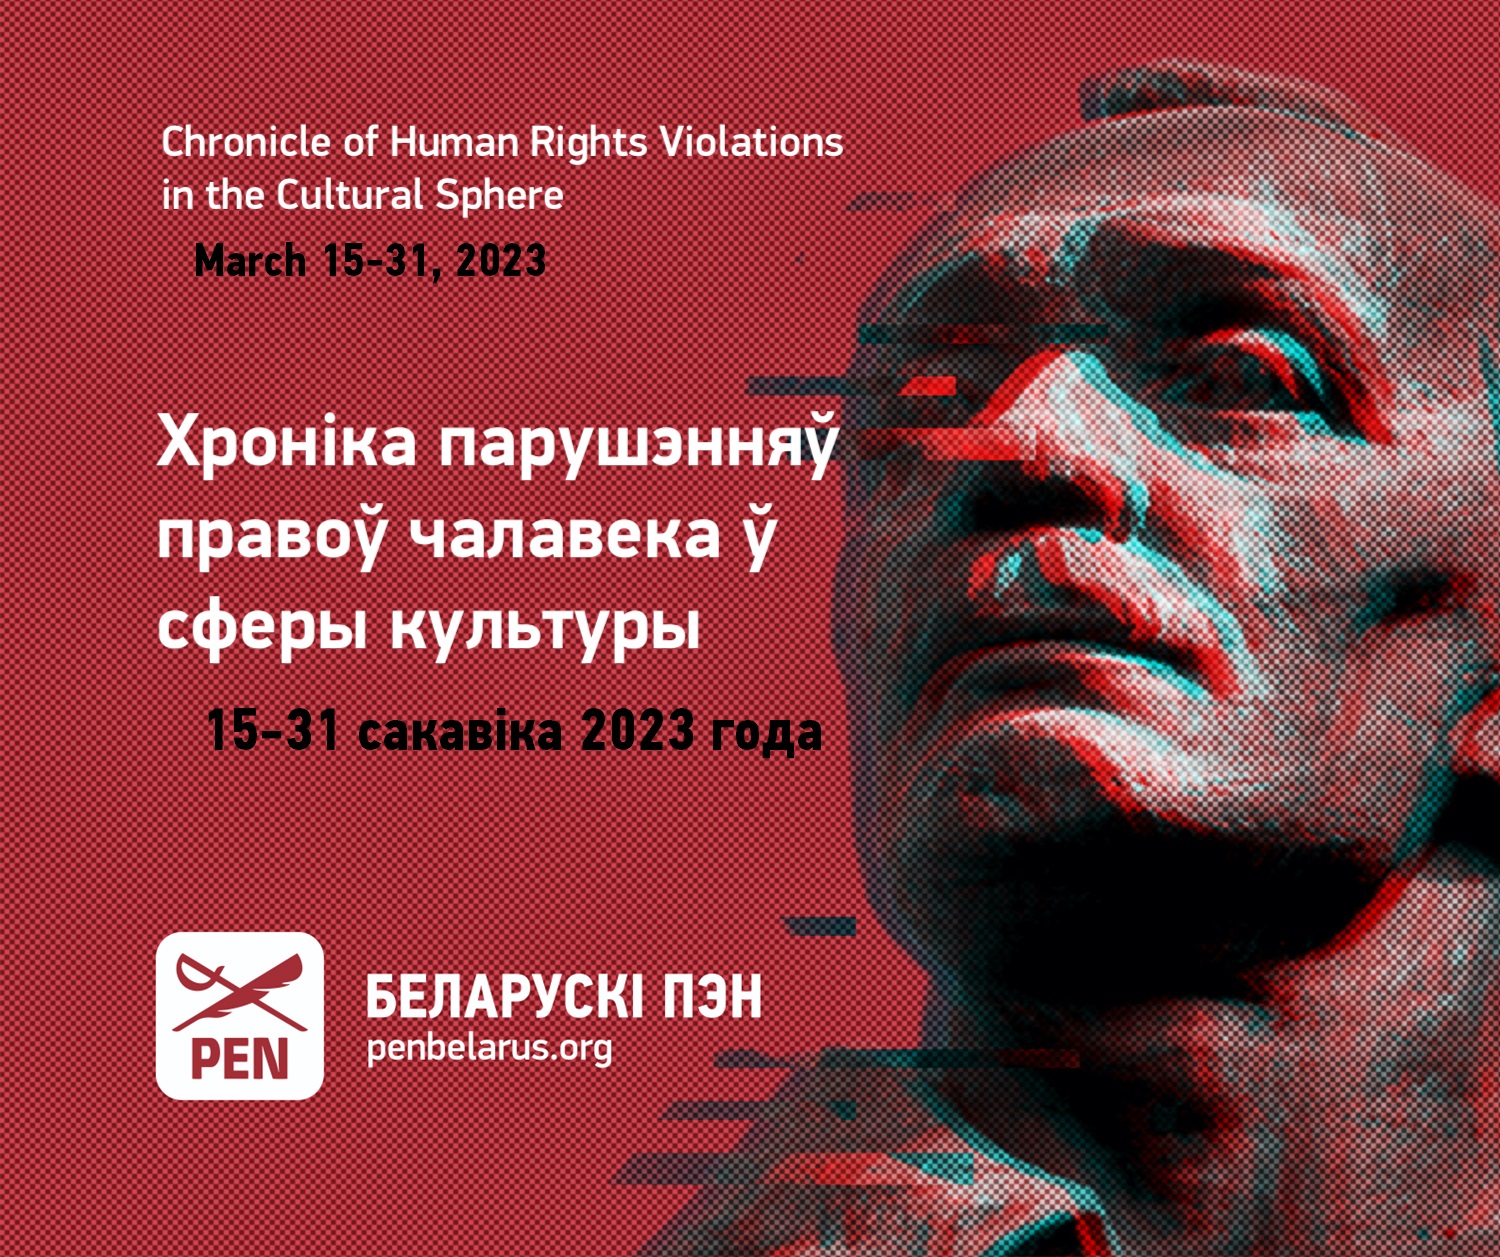 Chronicle of human rights violations in the sphere of culture (March 15–31, 2023)